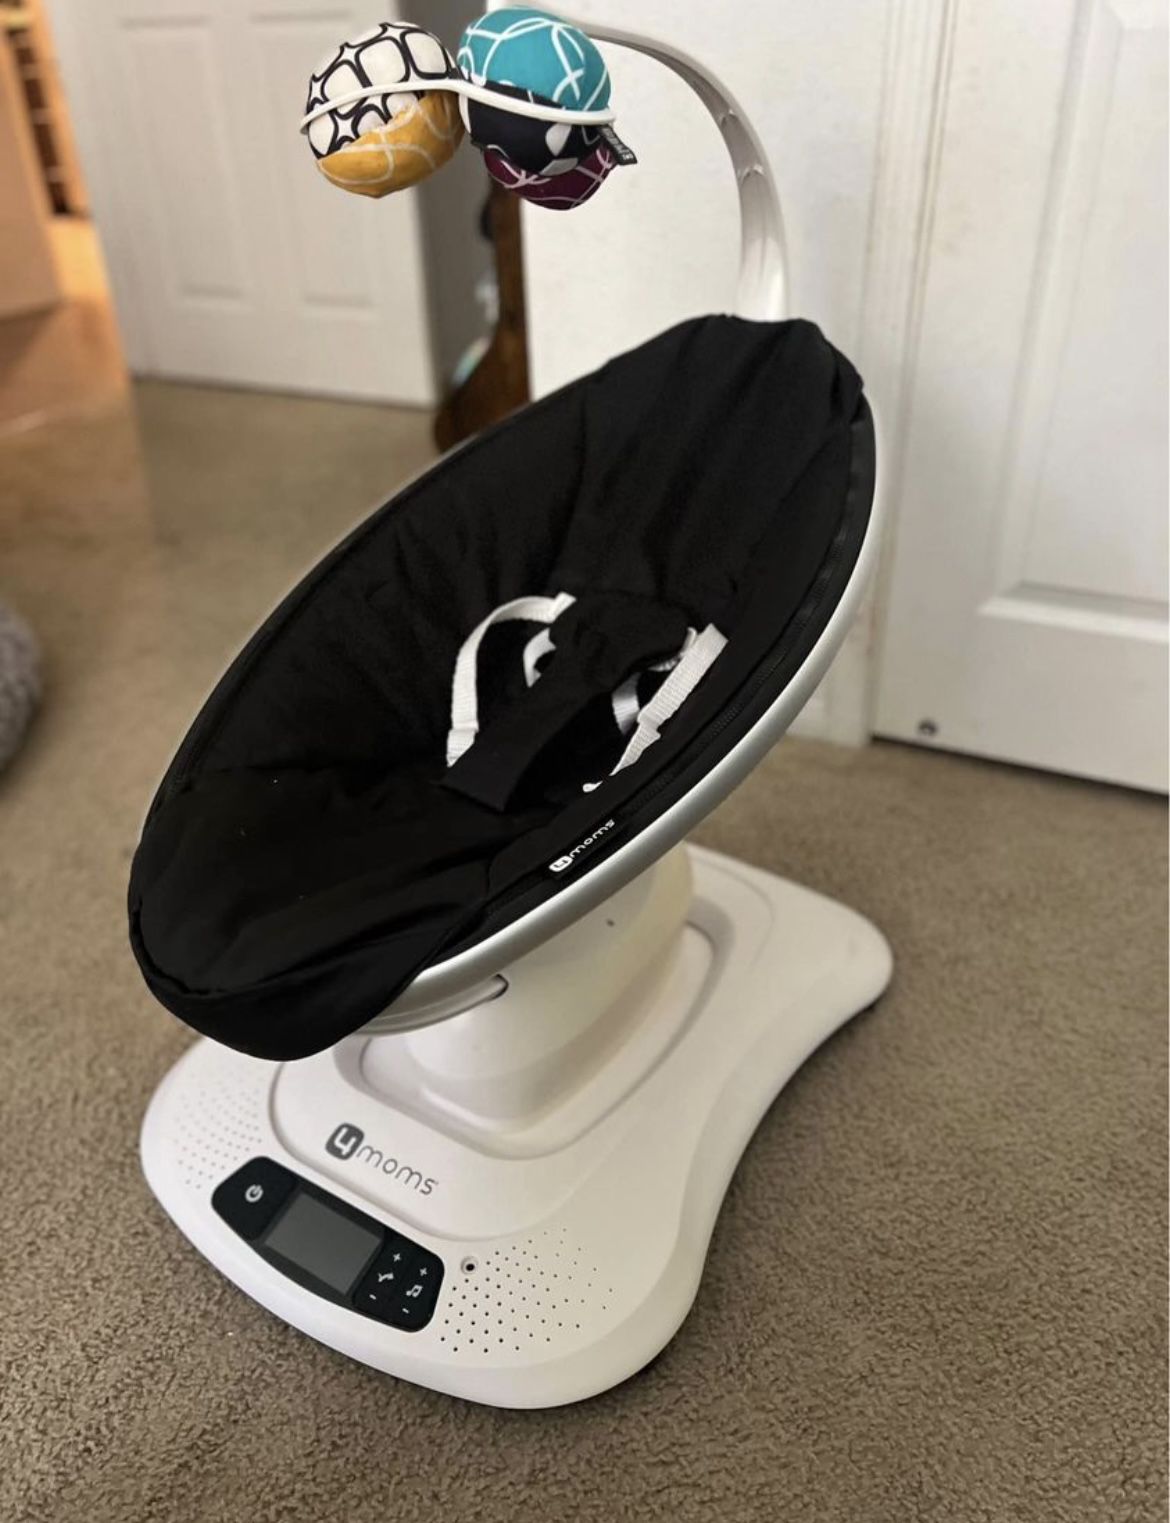 Super Cool Electric Baby Swing!! MamaRoo!